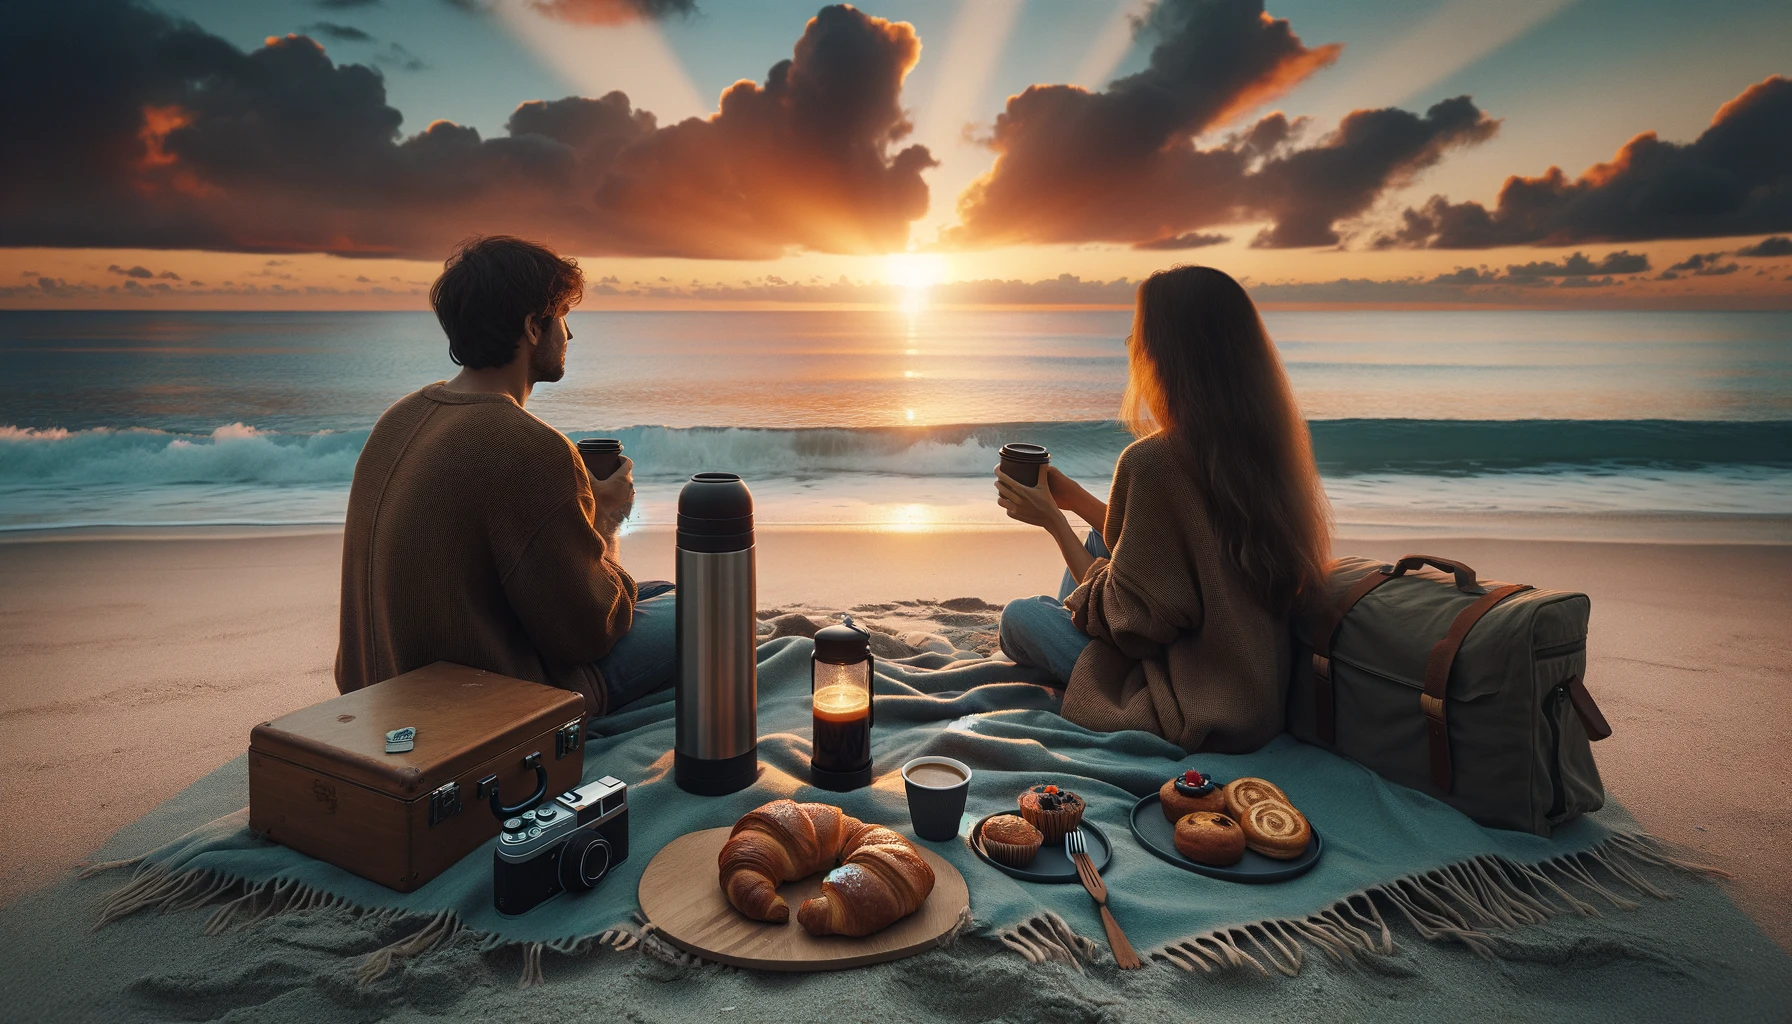 A serene sunrise over the ocean, with a couple enjoying a coffee date on the beach. They have a thermos and a portable french press, with freshly baked pastries like croissants and muffins nearby. A cozy blanket is spread out on the sand, and a portable speaker is playing soft, ambient music. The sky is gradually lighting up with spectacular colors of the sunrise, and the peaceful sound of waves is in the background. The scene conveys an intimate and memorable start to the day.